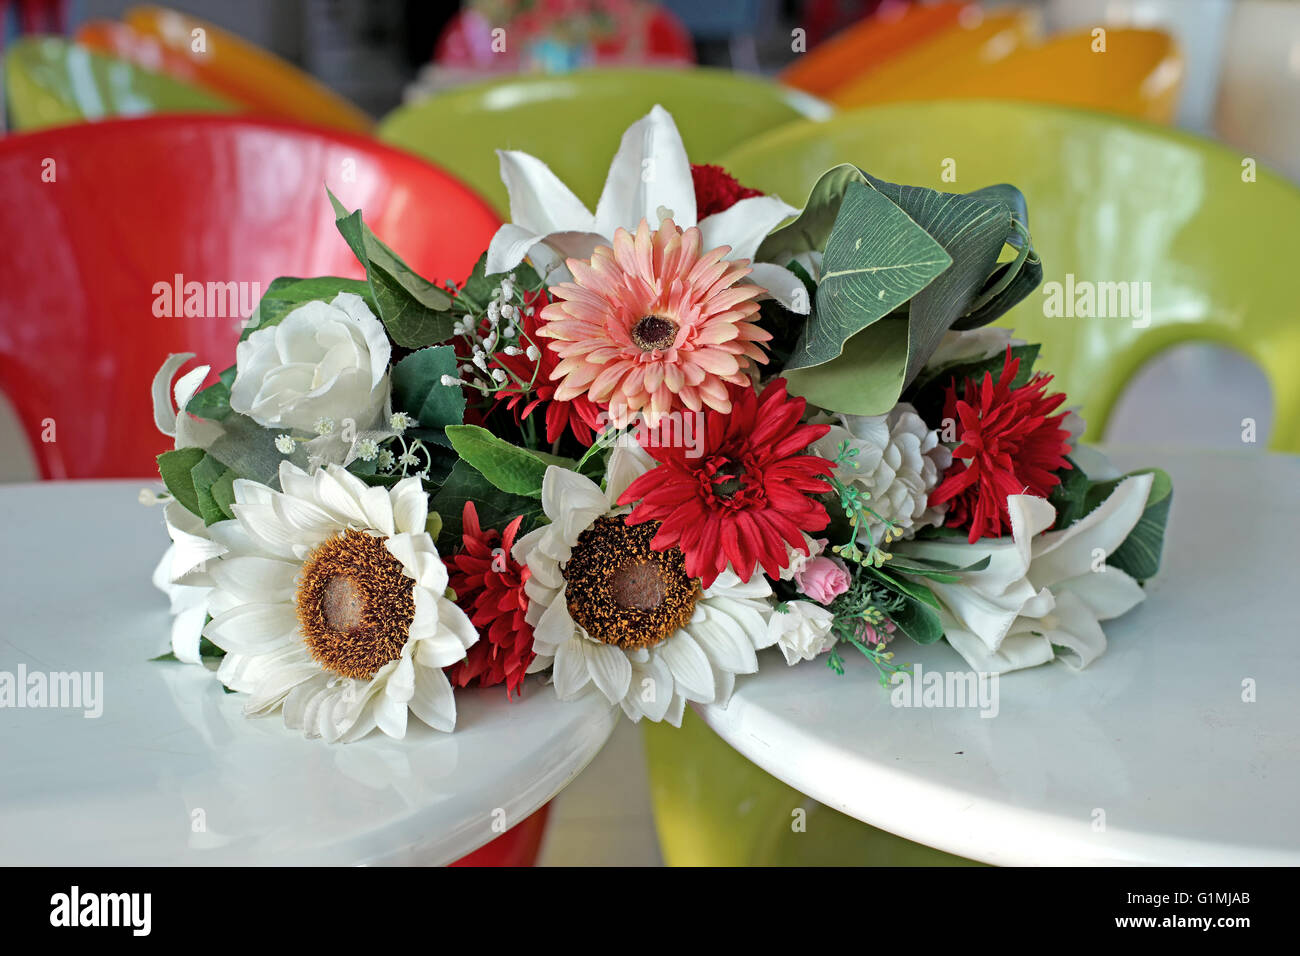 colorful artificial flower in flowerpot on the table Stock Photo